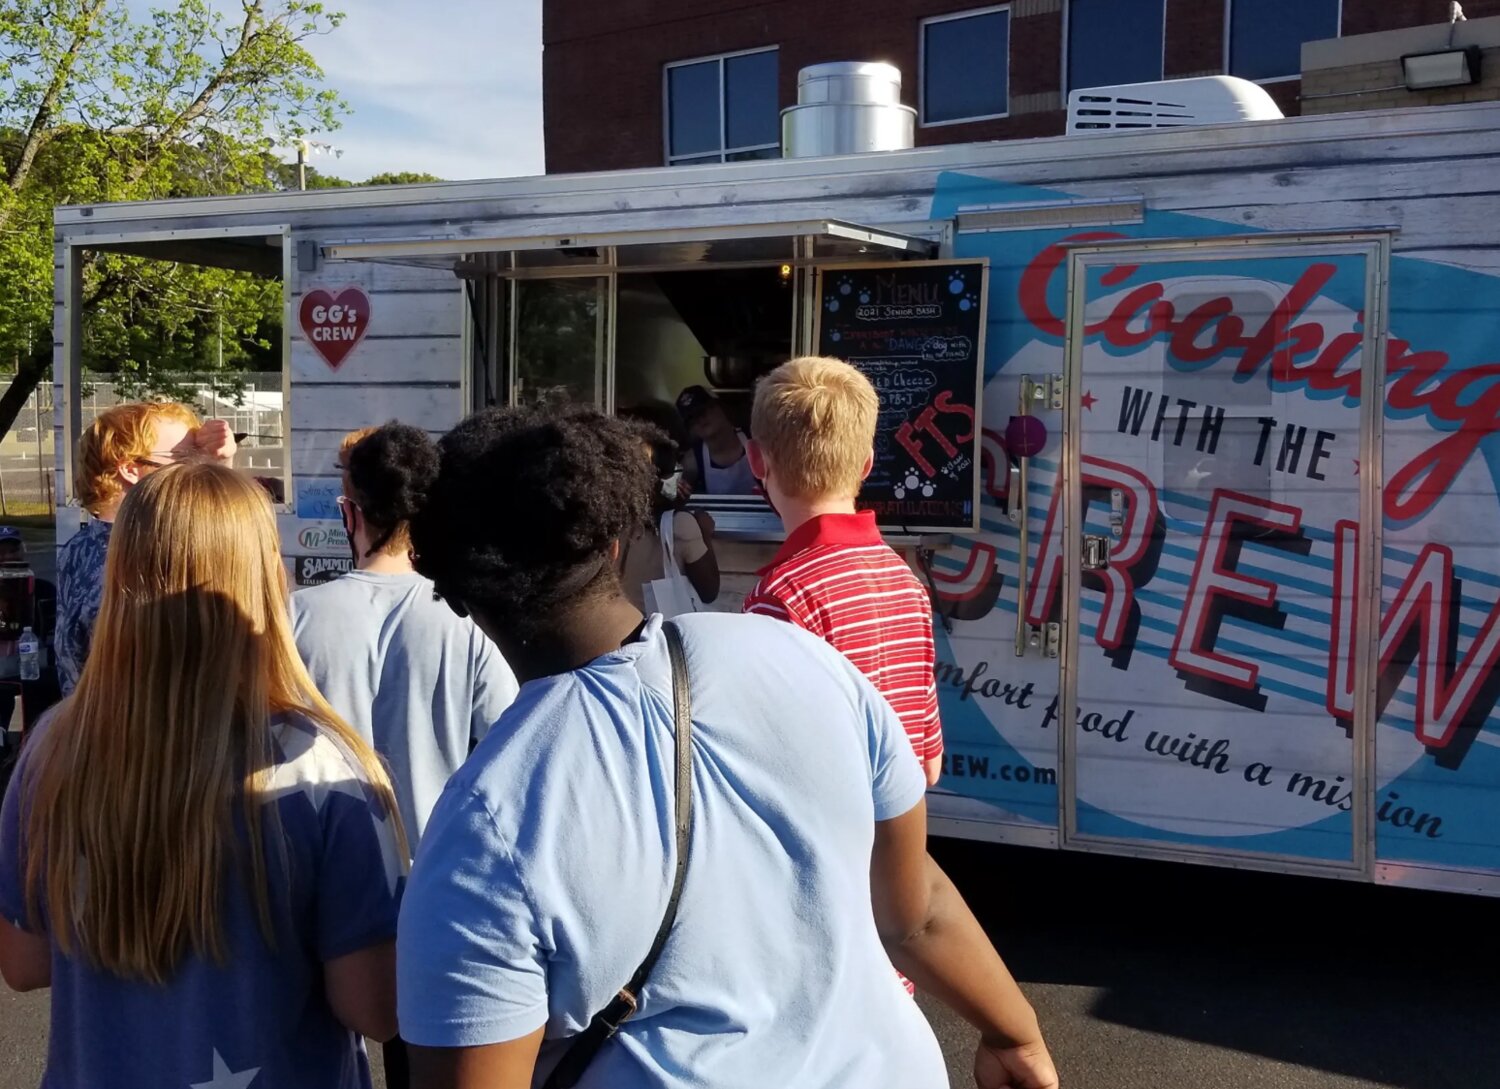 Miller's Crew's 'Cooking with the Crew' food truck allows staff to train crew members while connecting with the community at seasonal events.